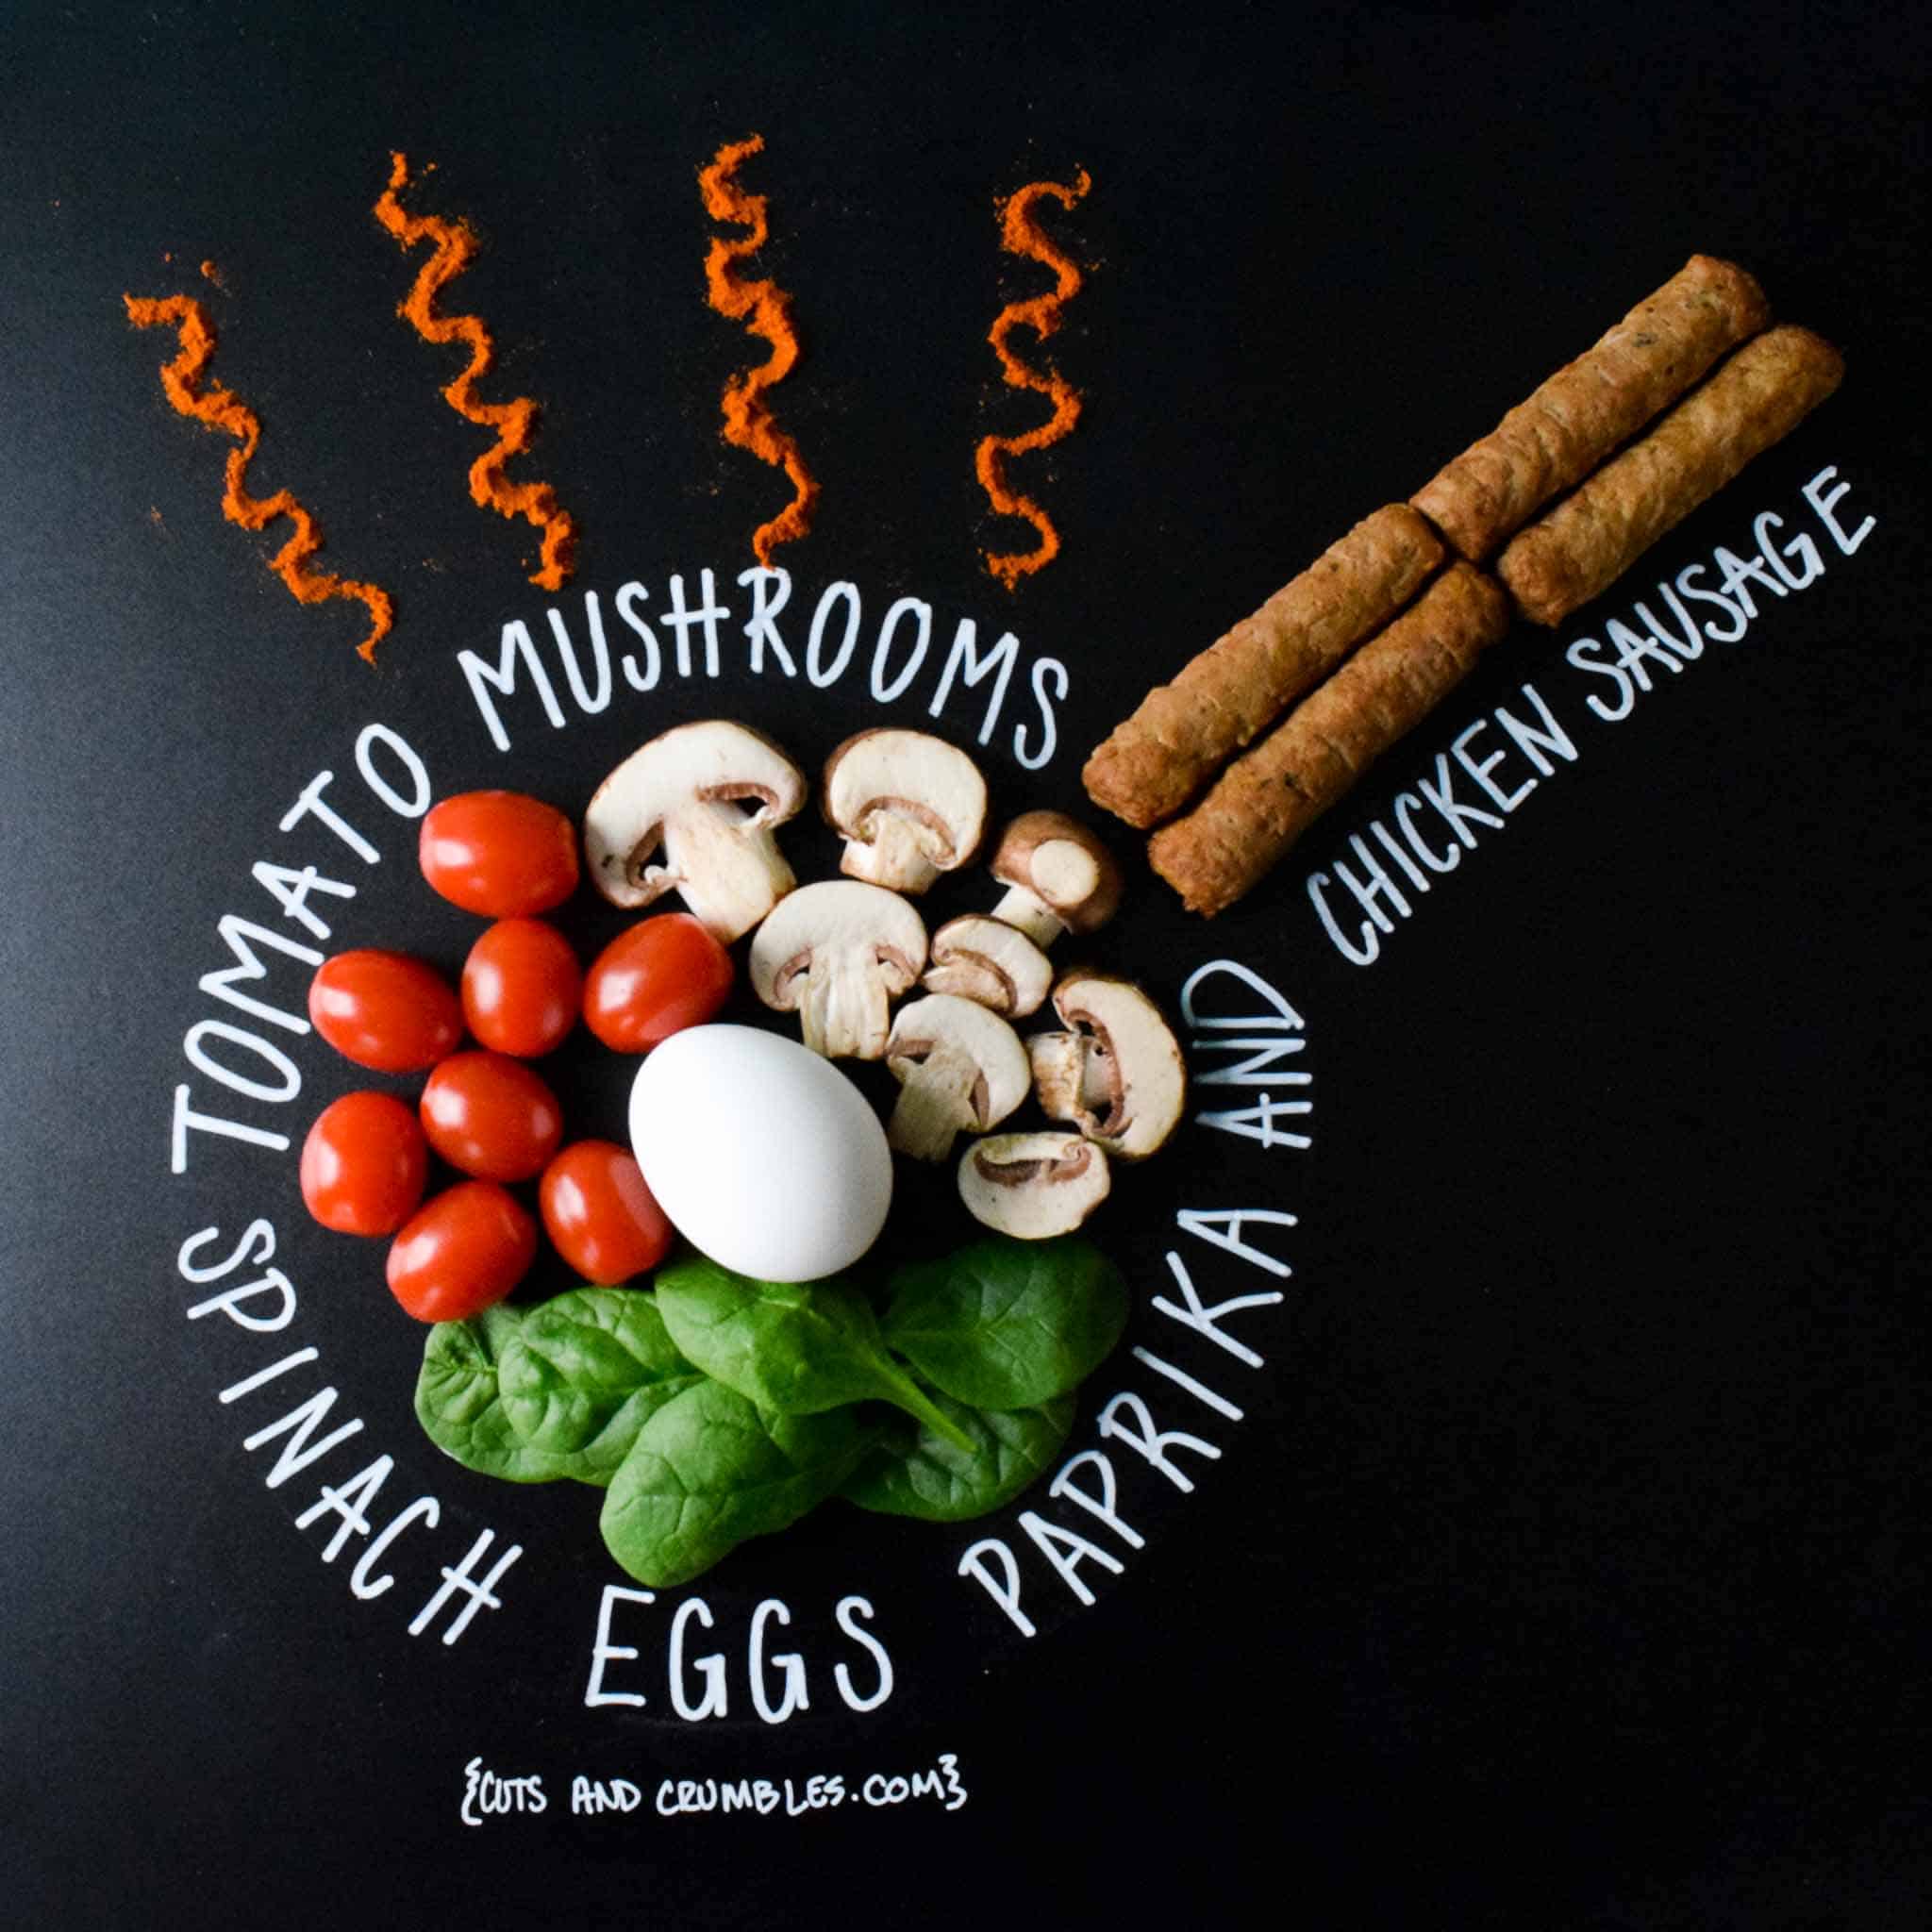 Poached Eggs Over Chicken Sausage and Veggies ingredients on chalkboard designed like a frying pan